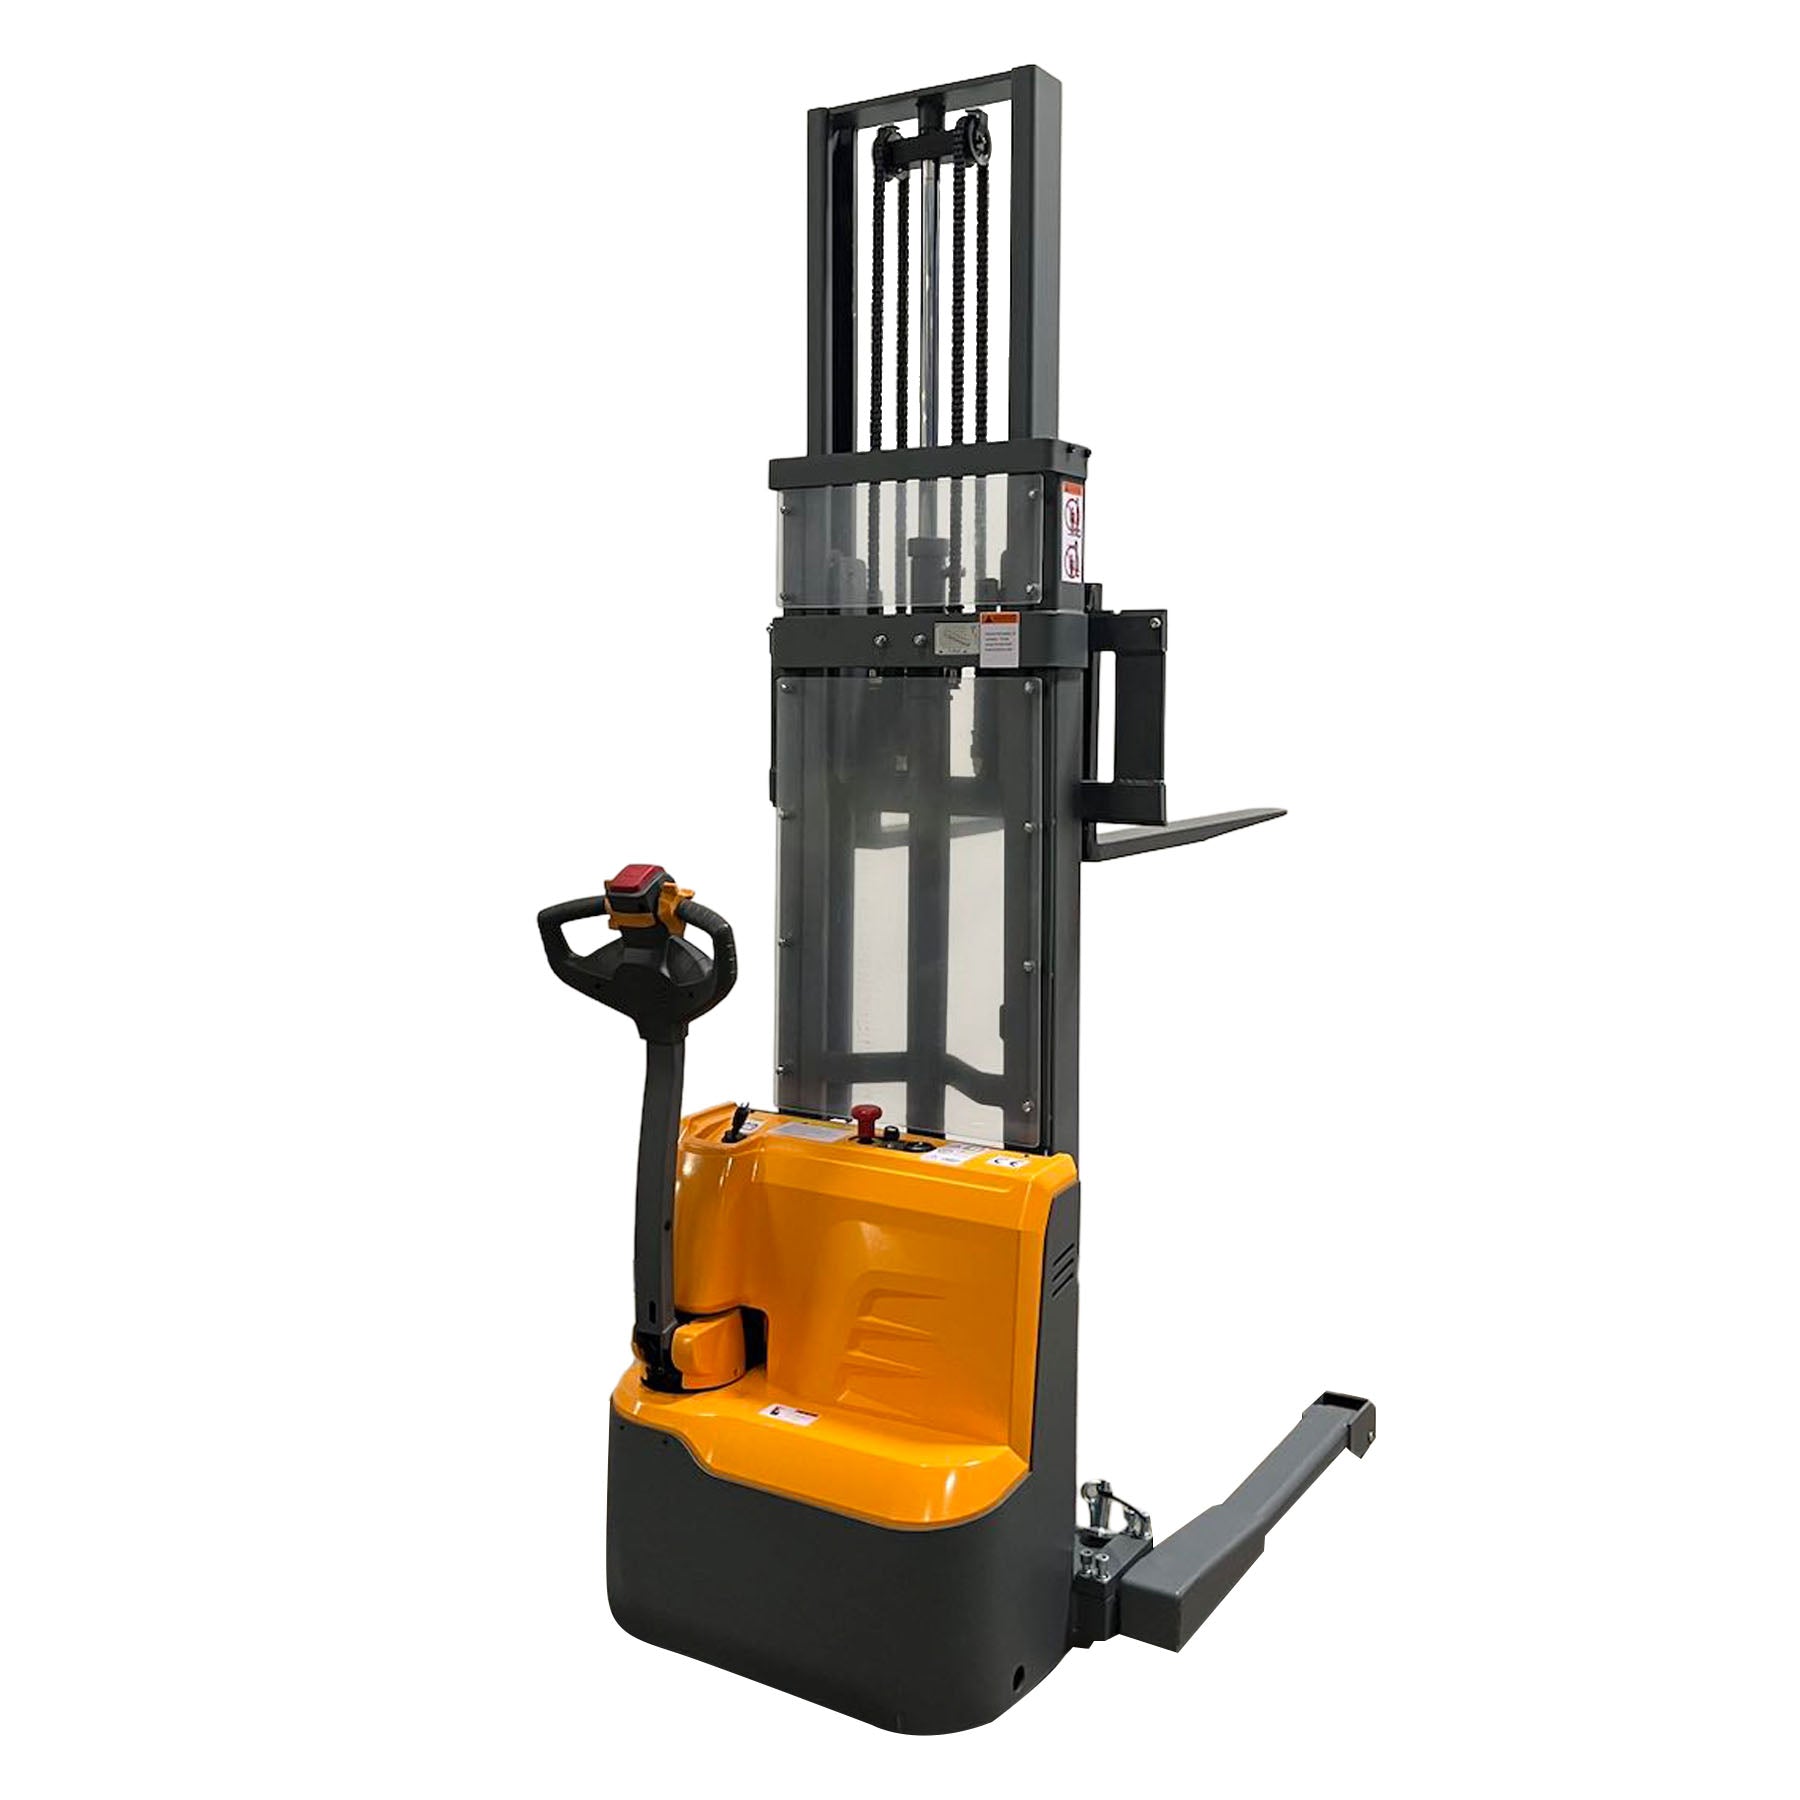 ApolloLift | Forklift Lithium Battery Full Electric Walkie Stacker 2640lbs Cap. Straddle Legs. 118" lifting A-3035